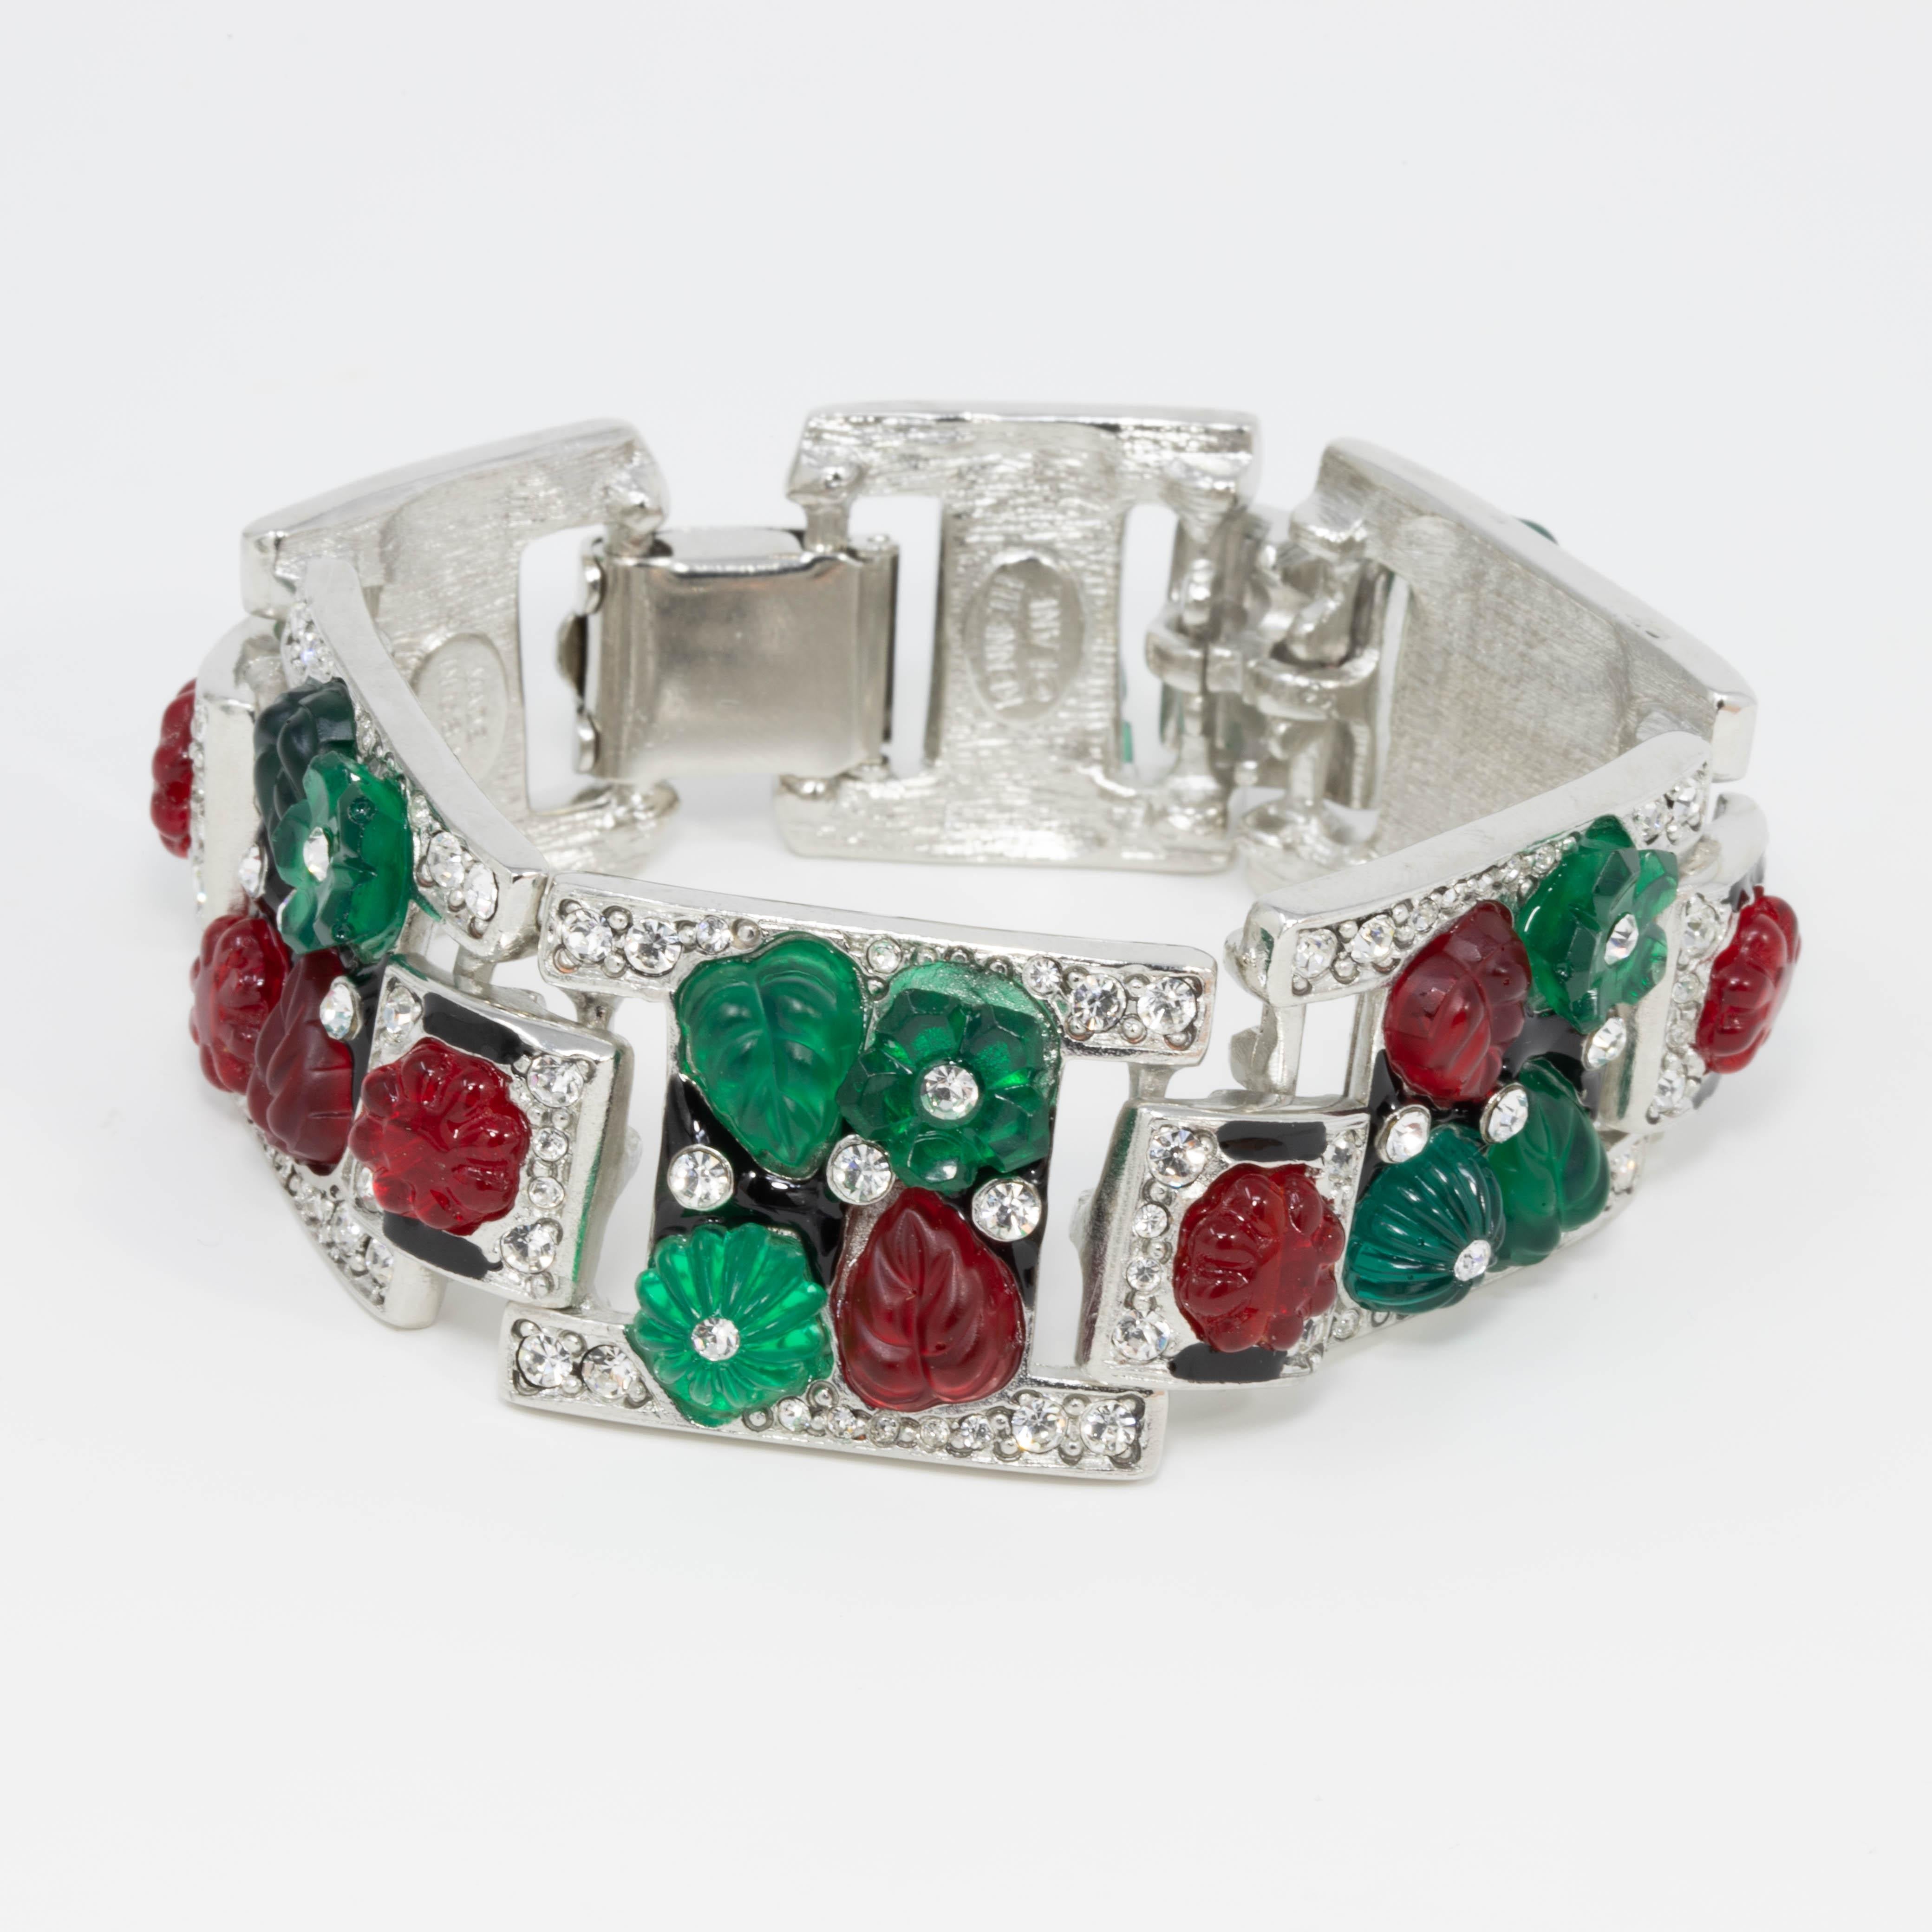 Colorful link bracelet by Kenneth Jay Lane. Red and green opaque tutti frutti fruit and leaf motifs accented with sparkling crystals crystals. Set on rhodium plating. Fold-over clasp closure.

Hallmarks: Kenneth Lane, Made in USA

Length: 7.25 in /